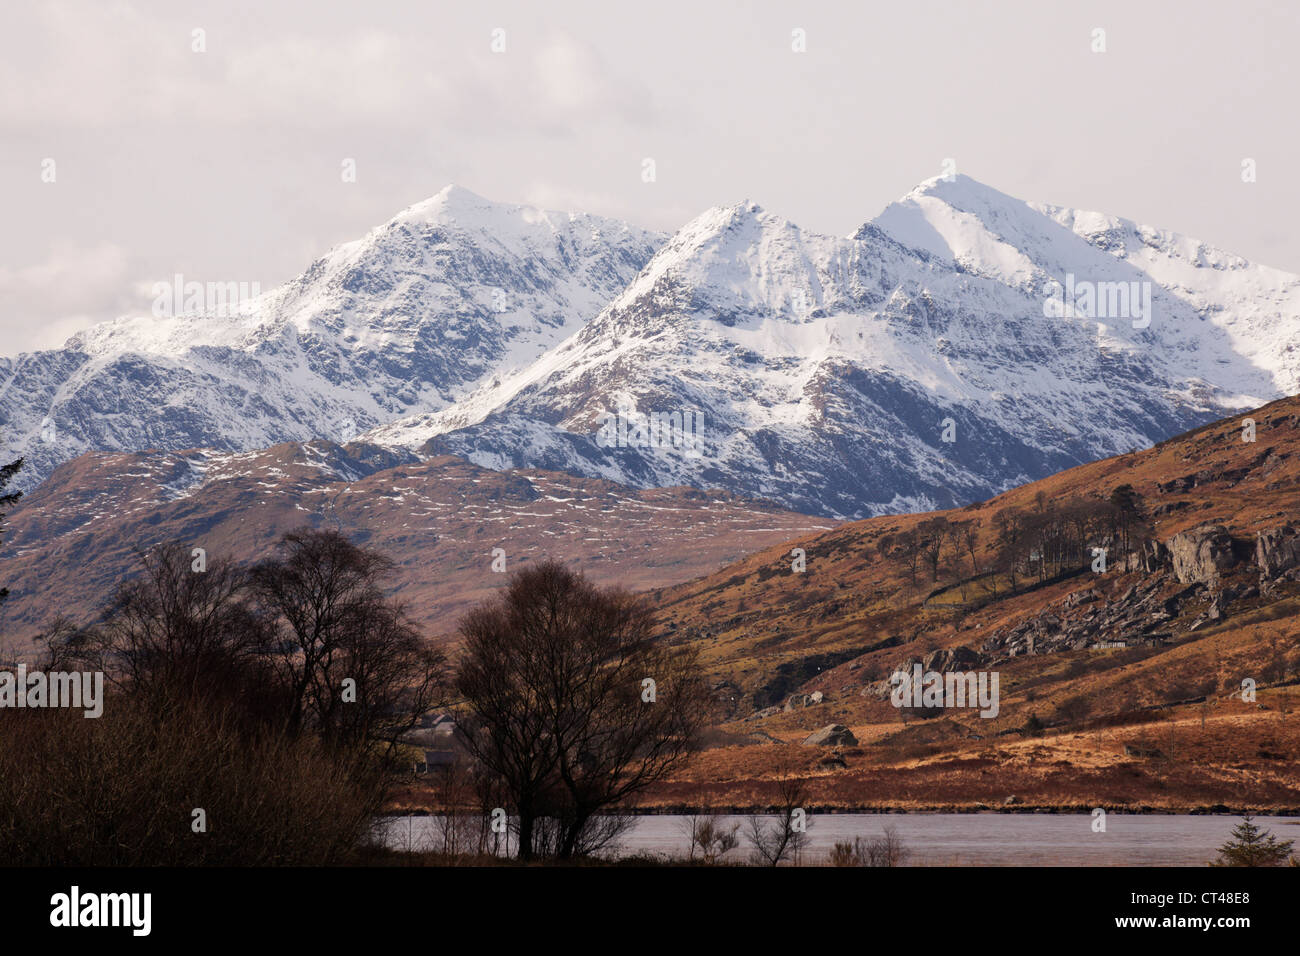 Mount Snowdon range from Capel Curig, Wales. Stock Photo